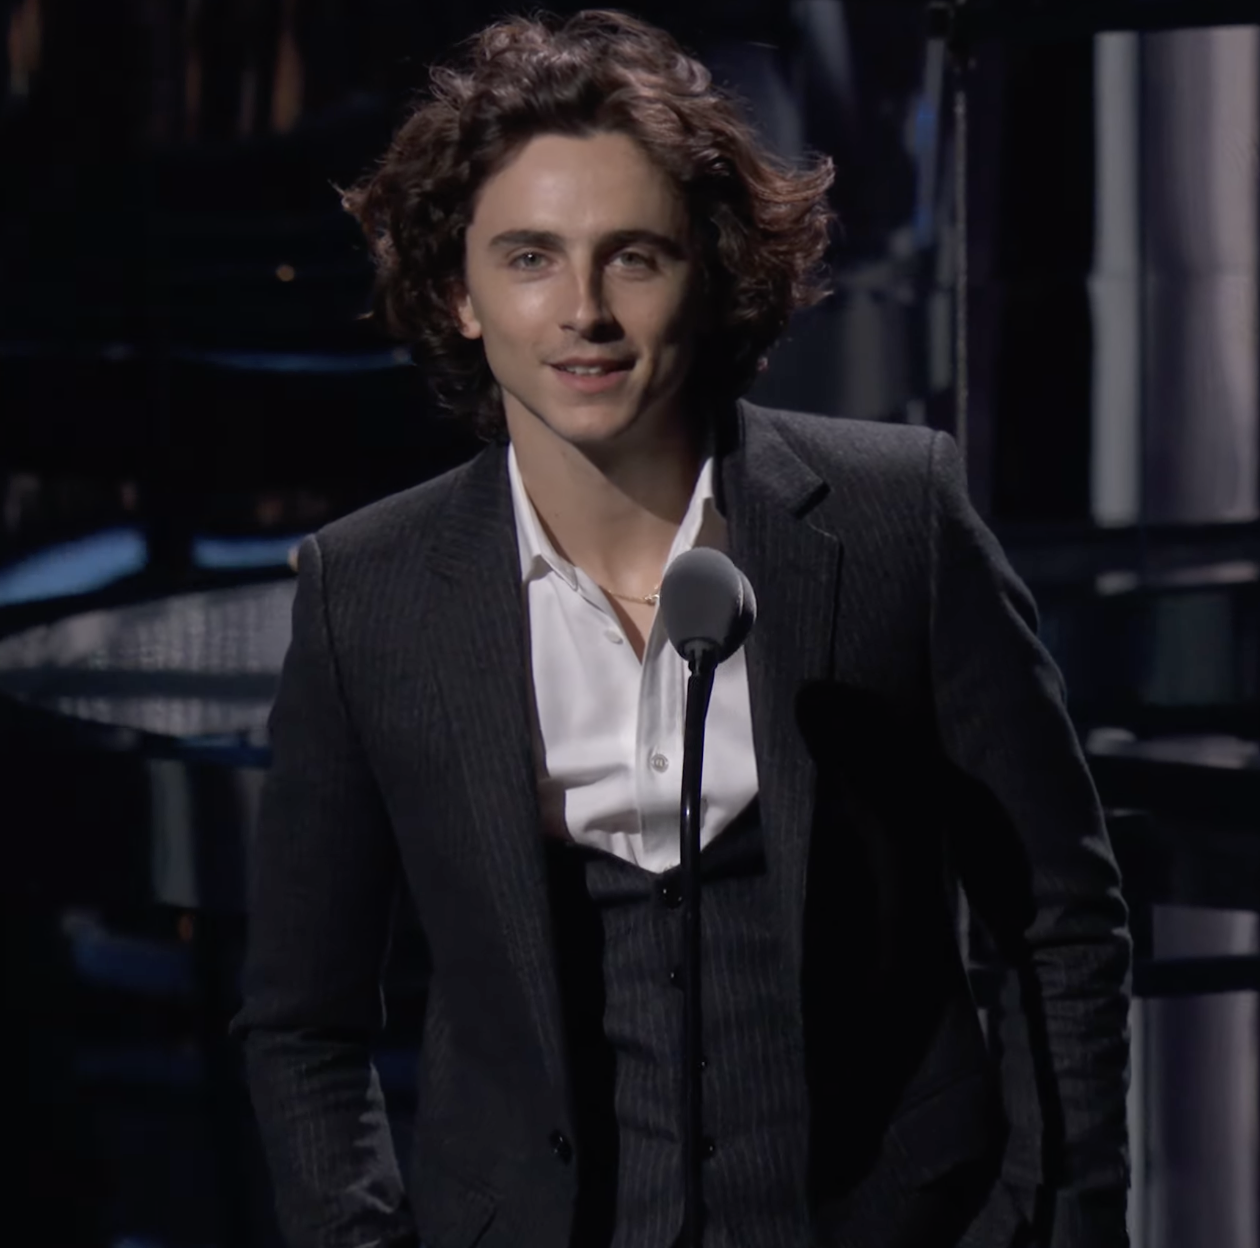 Timothee Chalamet presents The Game of the Year